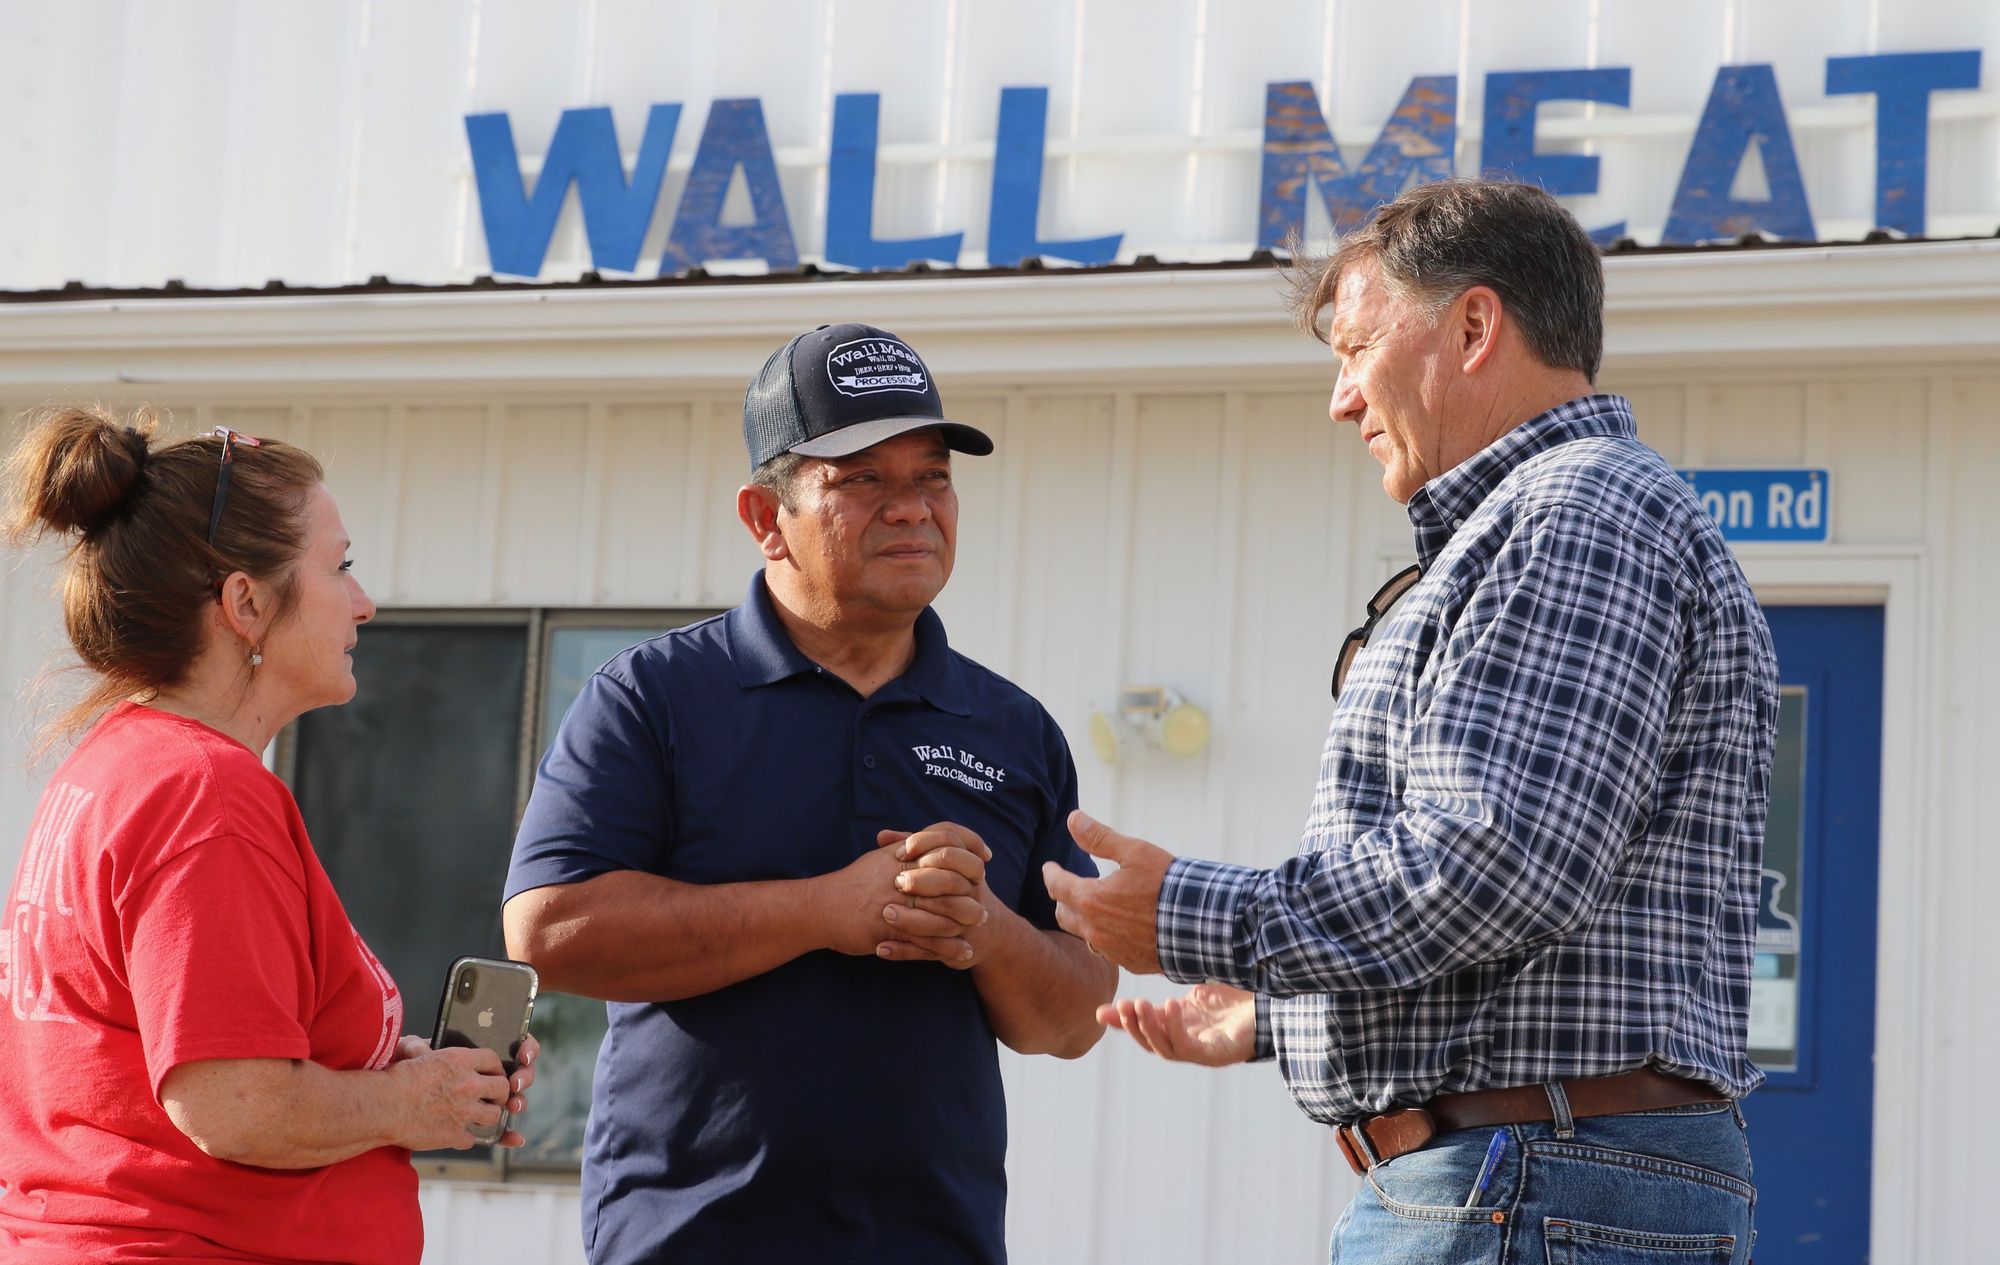 South Dakota U.S. Sen. Mike Rounds meetst with Wall Meat Processing co-owners Janet Niehaus and Ken Charfauros during a recent visit.